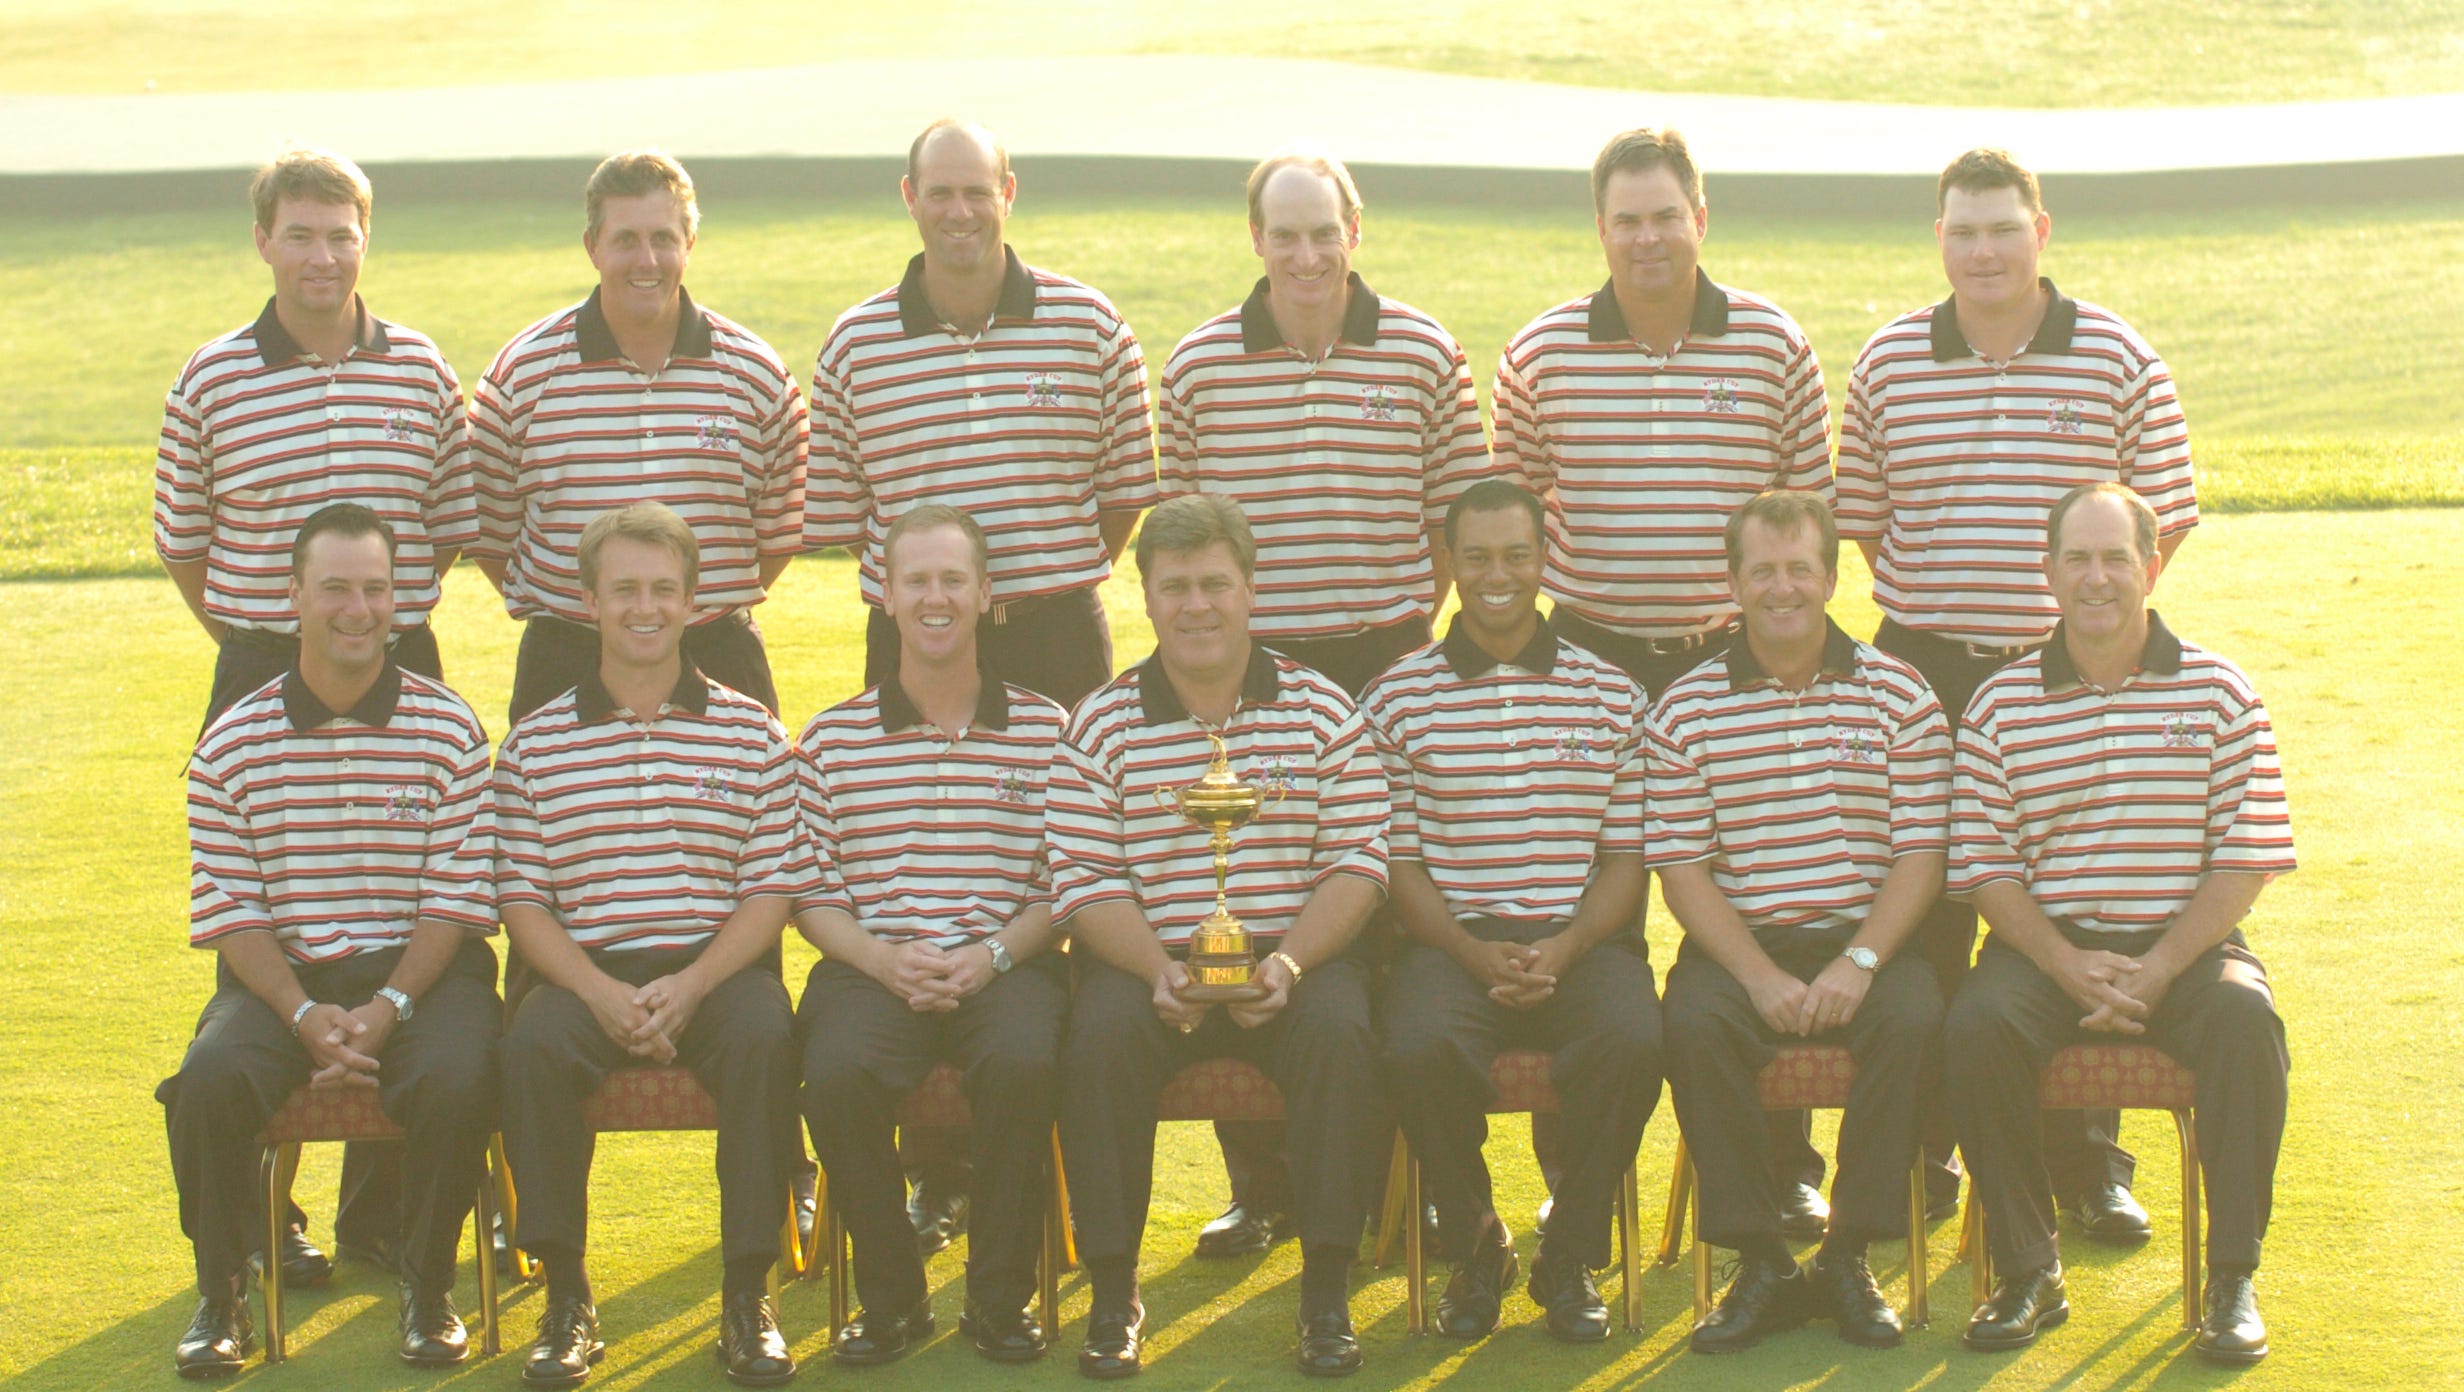 Team USA poses for its official portrait prior to the start of the 2004 Ryder Cup.